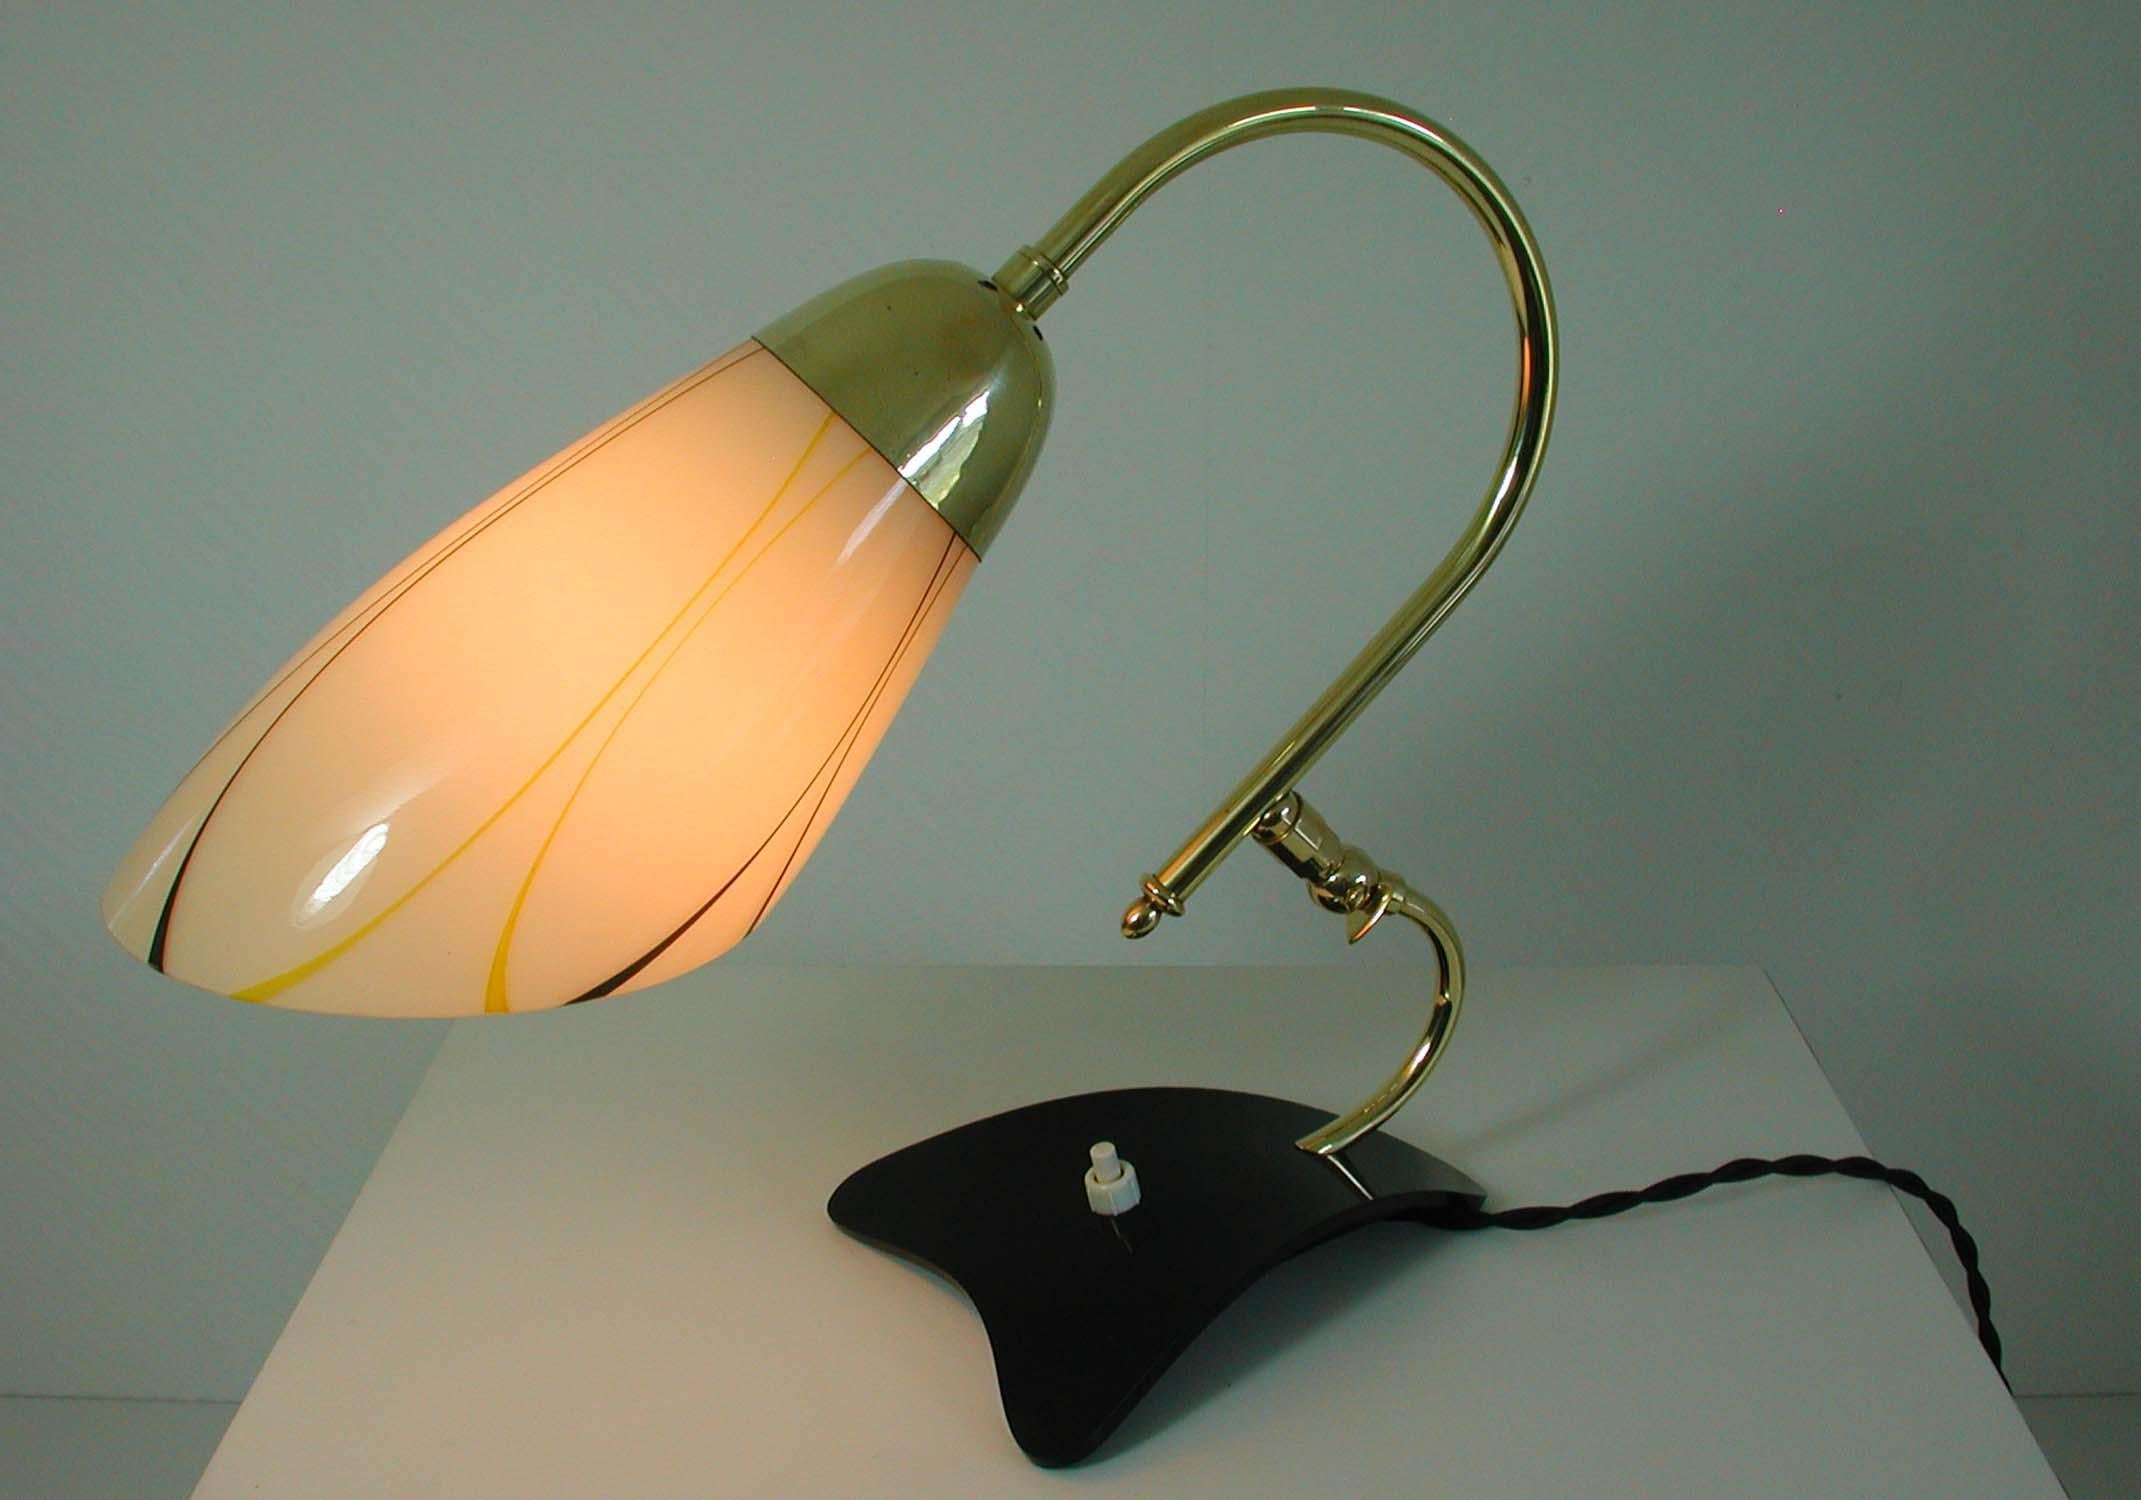 German Midcentury Adjustable Yellow, Black and White Table Lamp, 1950s For Sale 5